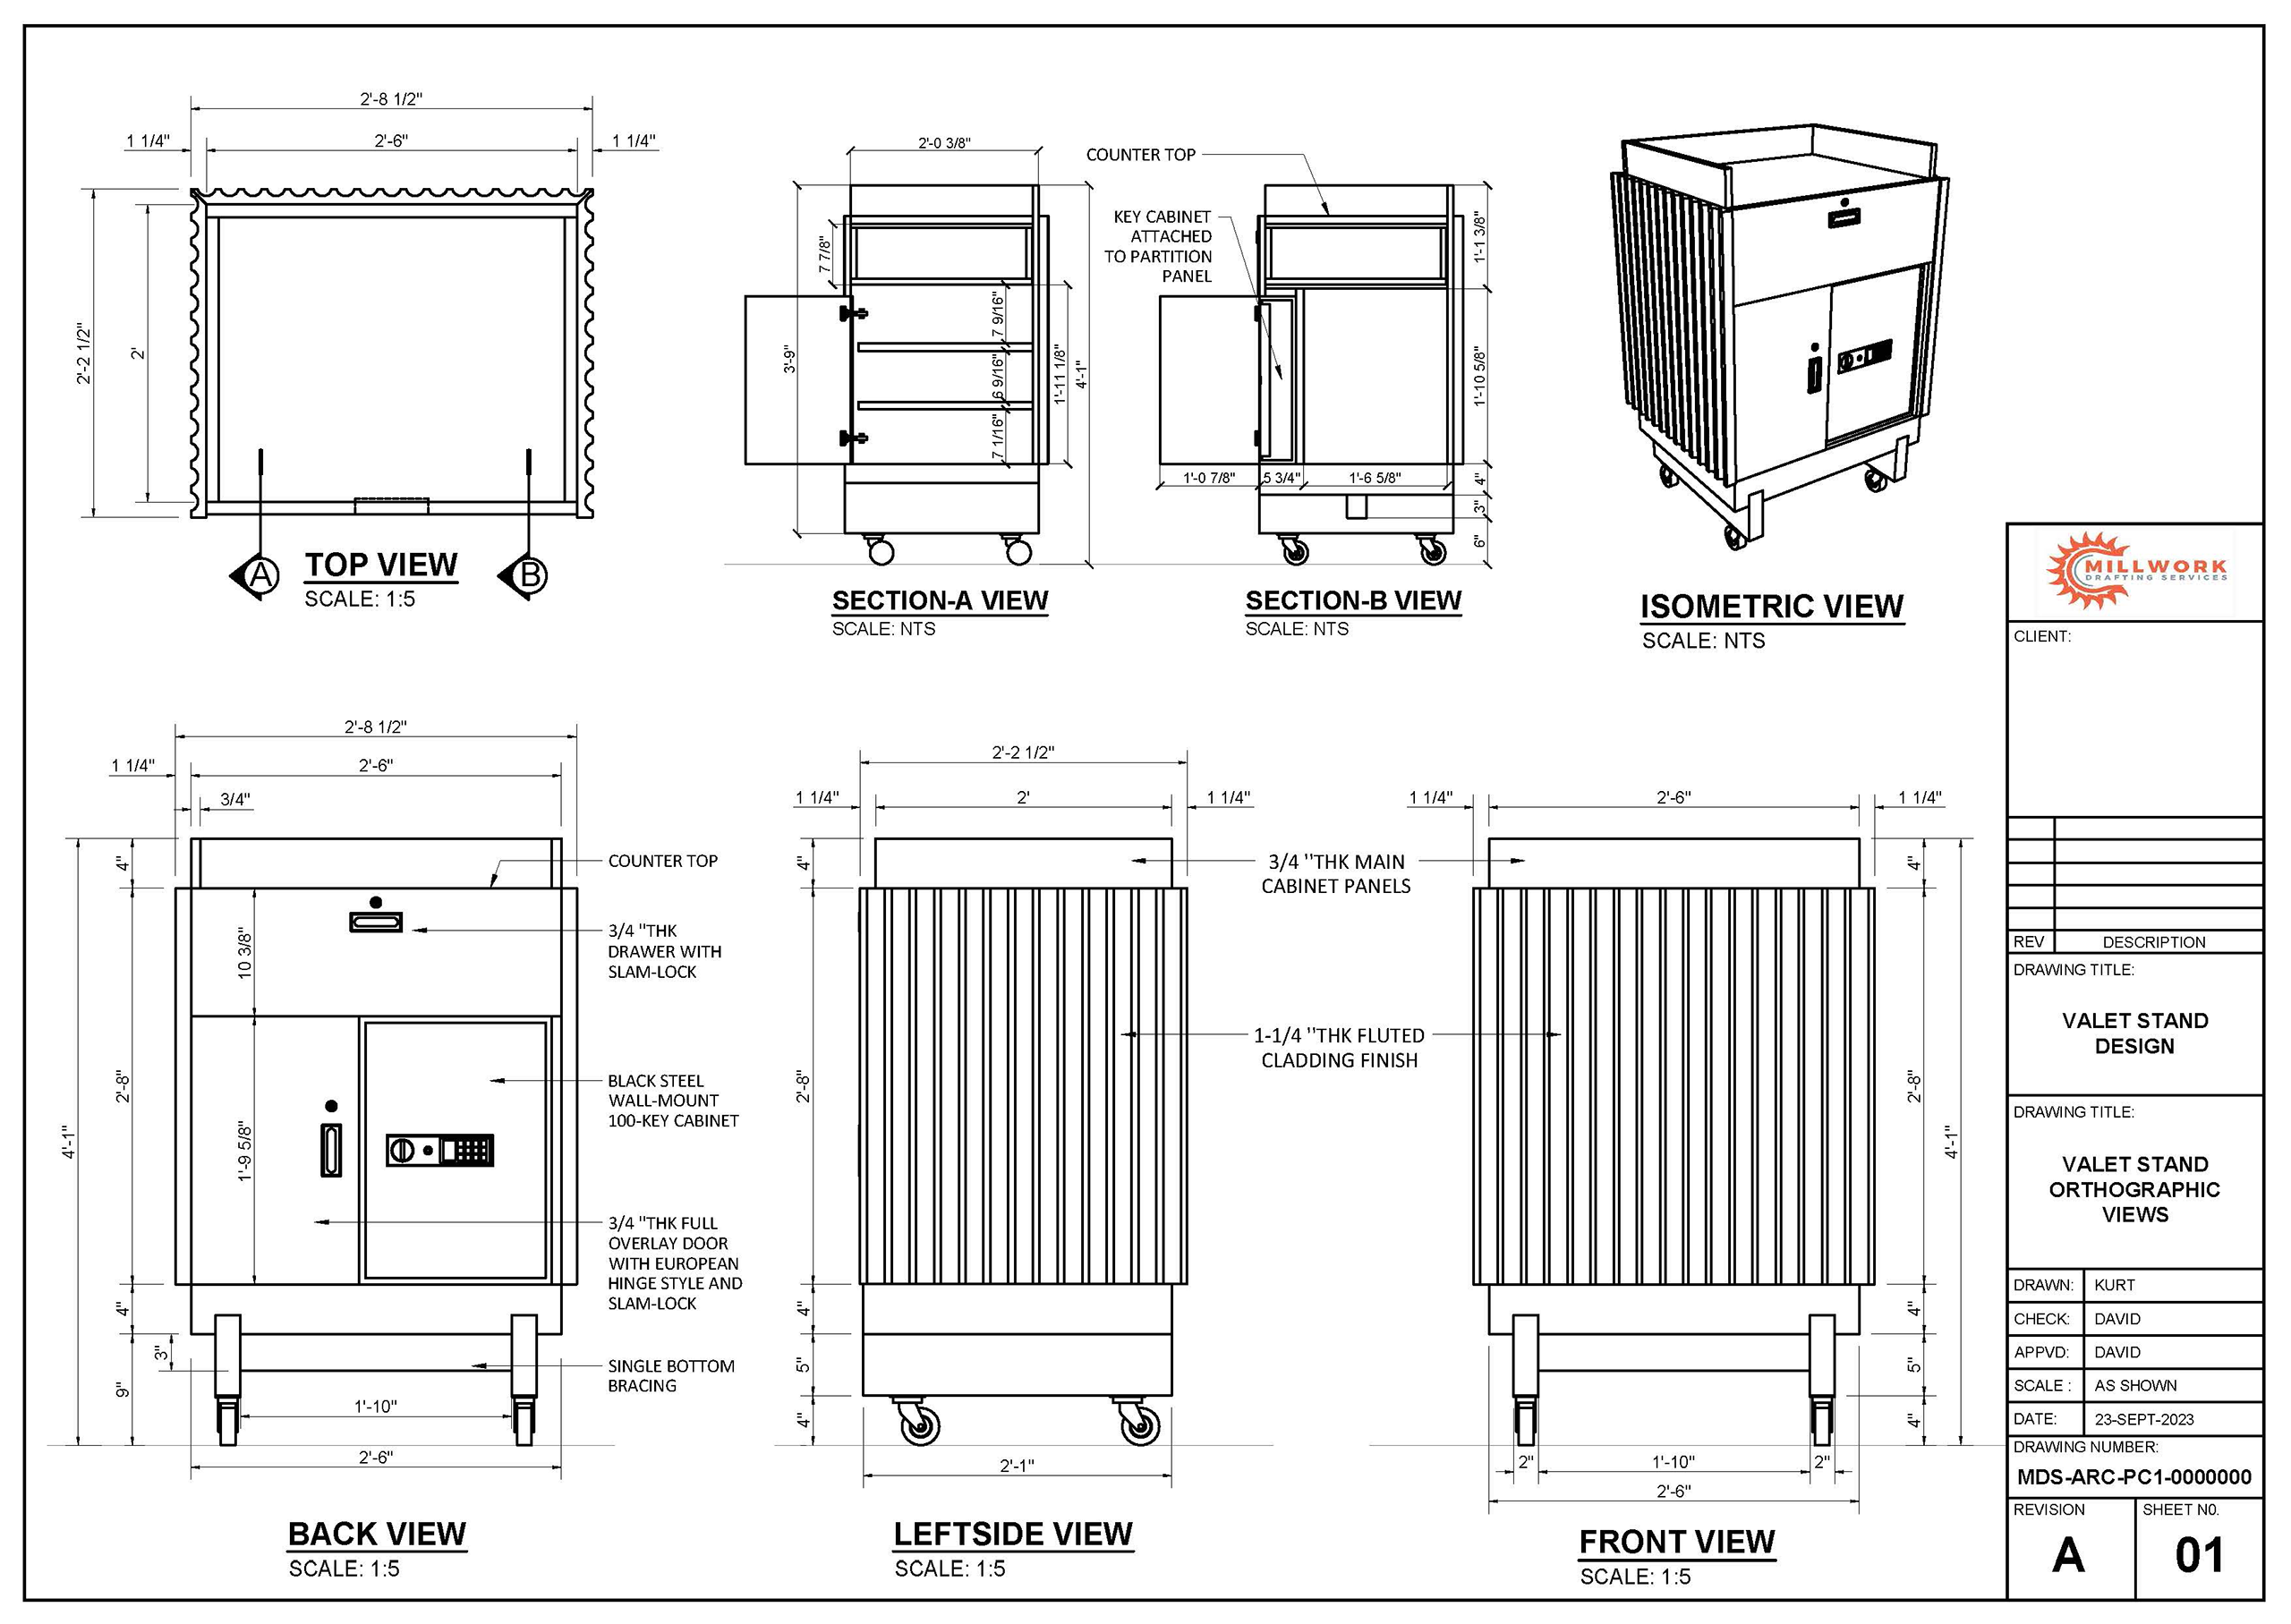 Architectural Millwork Detailed Drawings